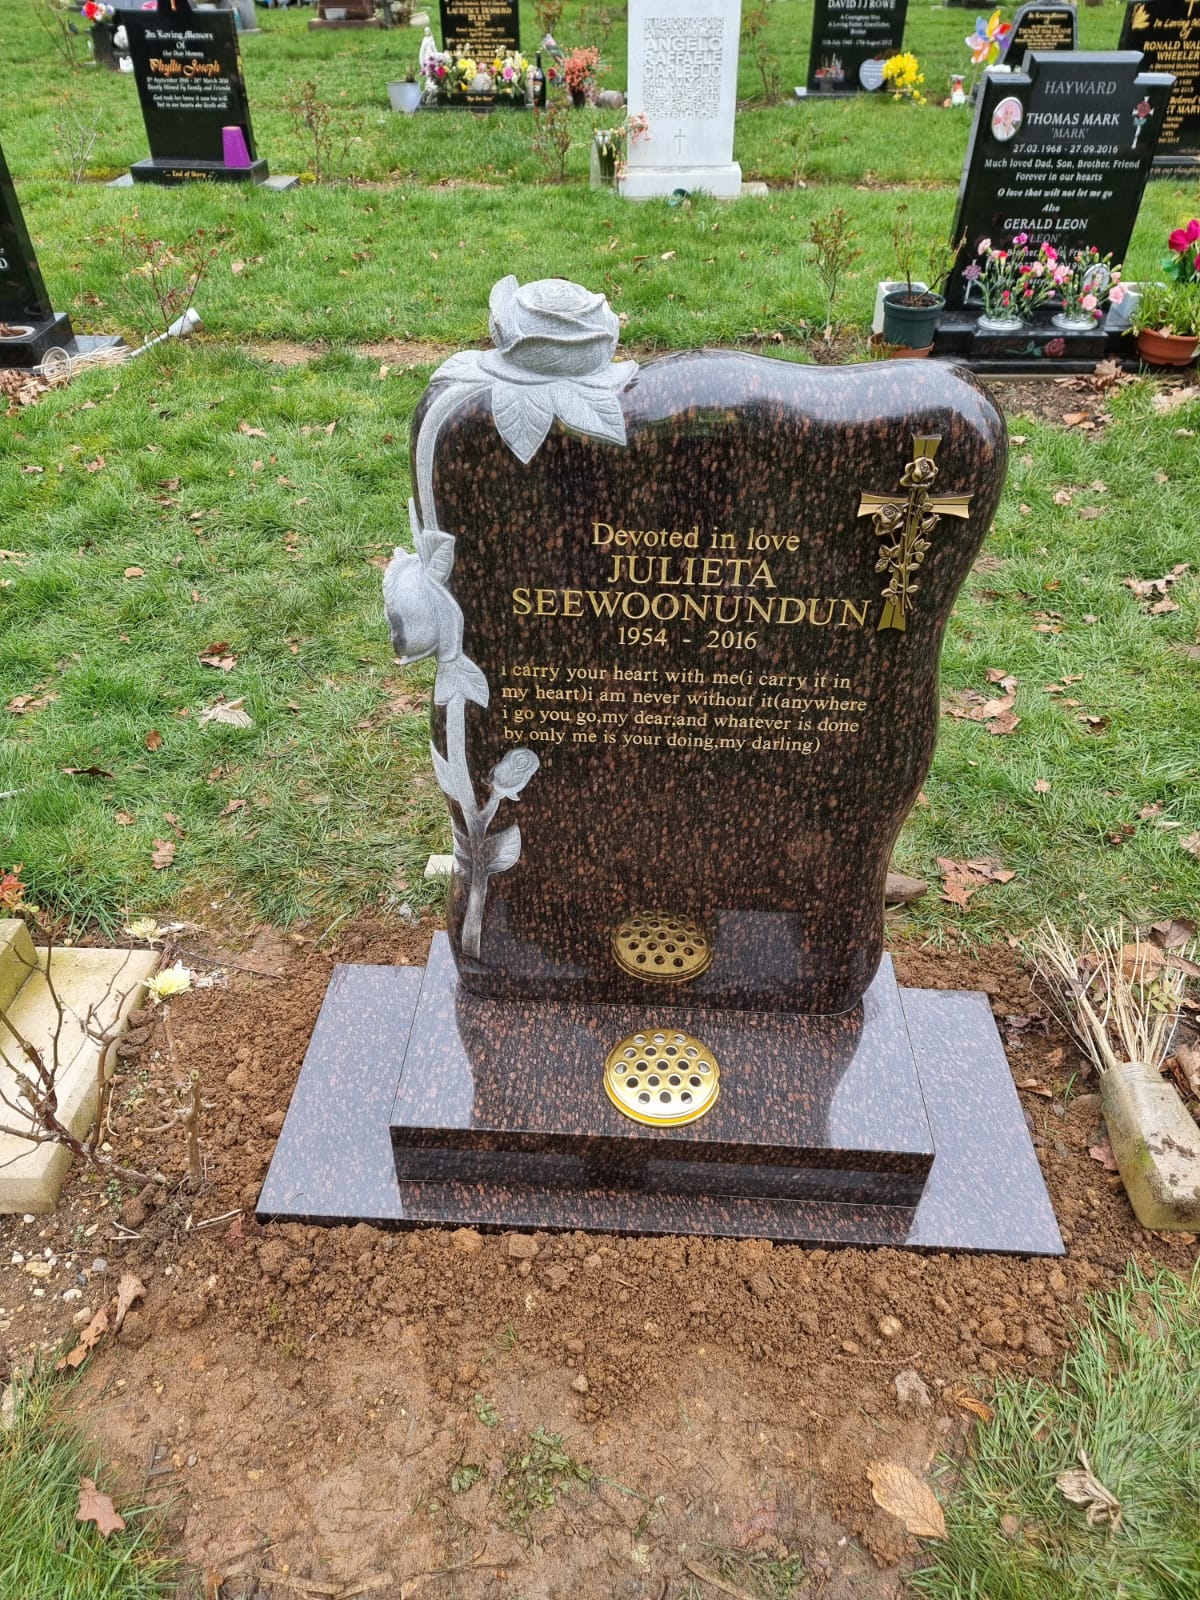 Headstone With Carved Tree